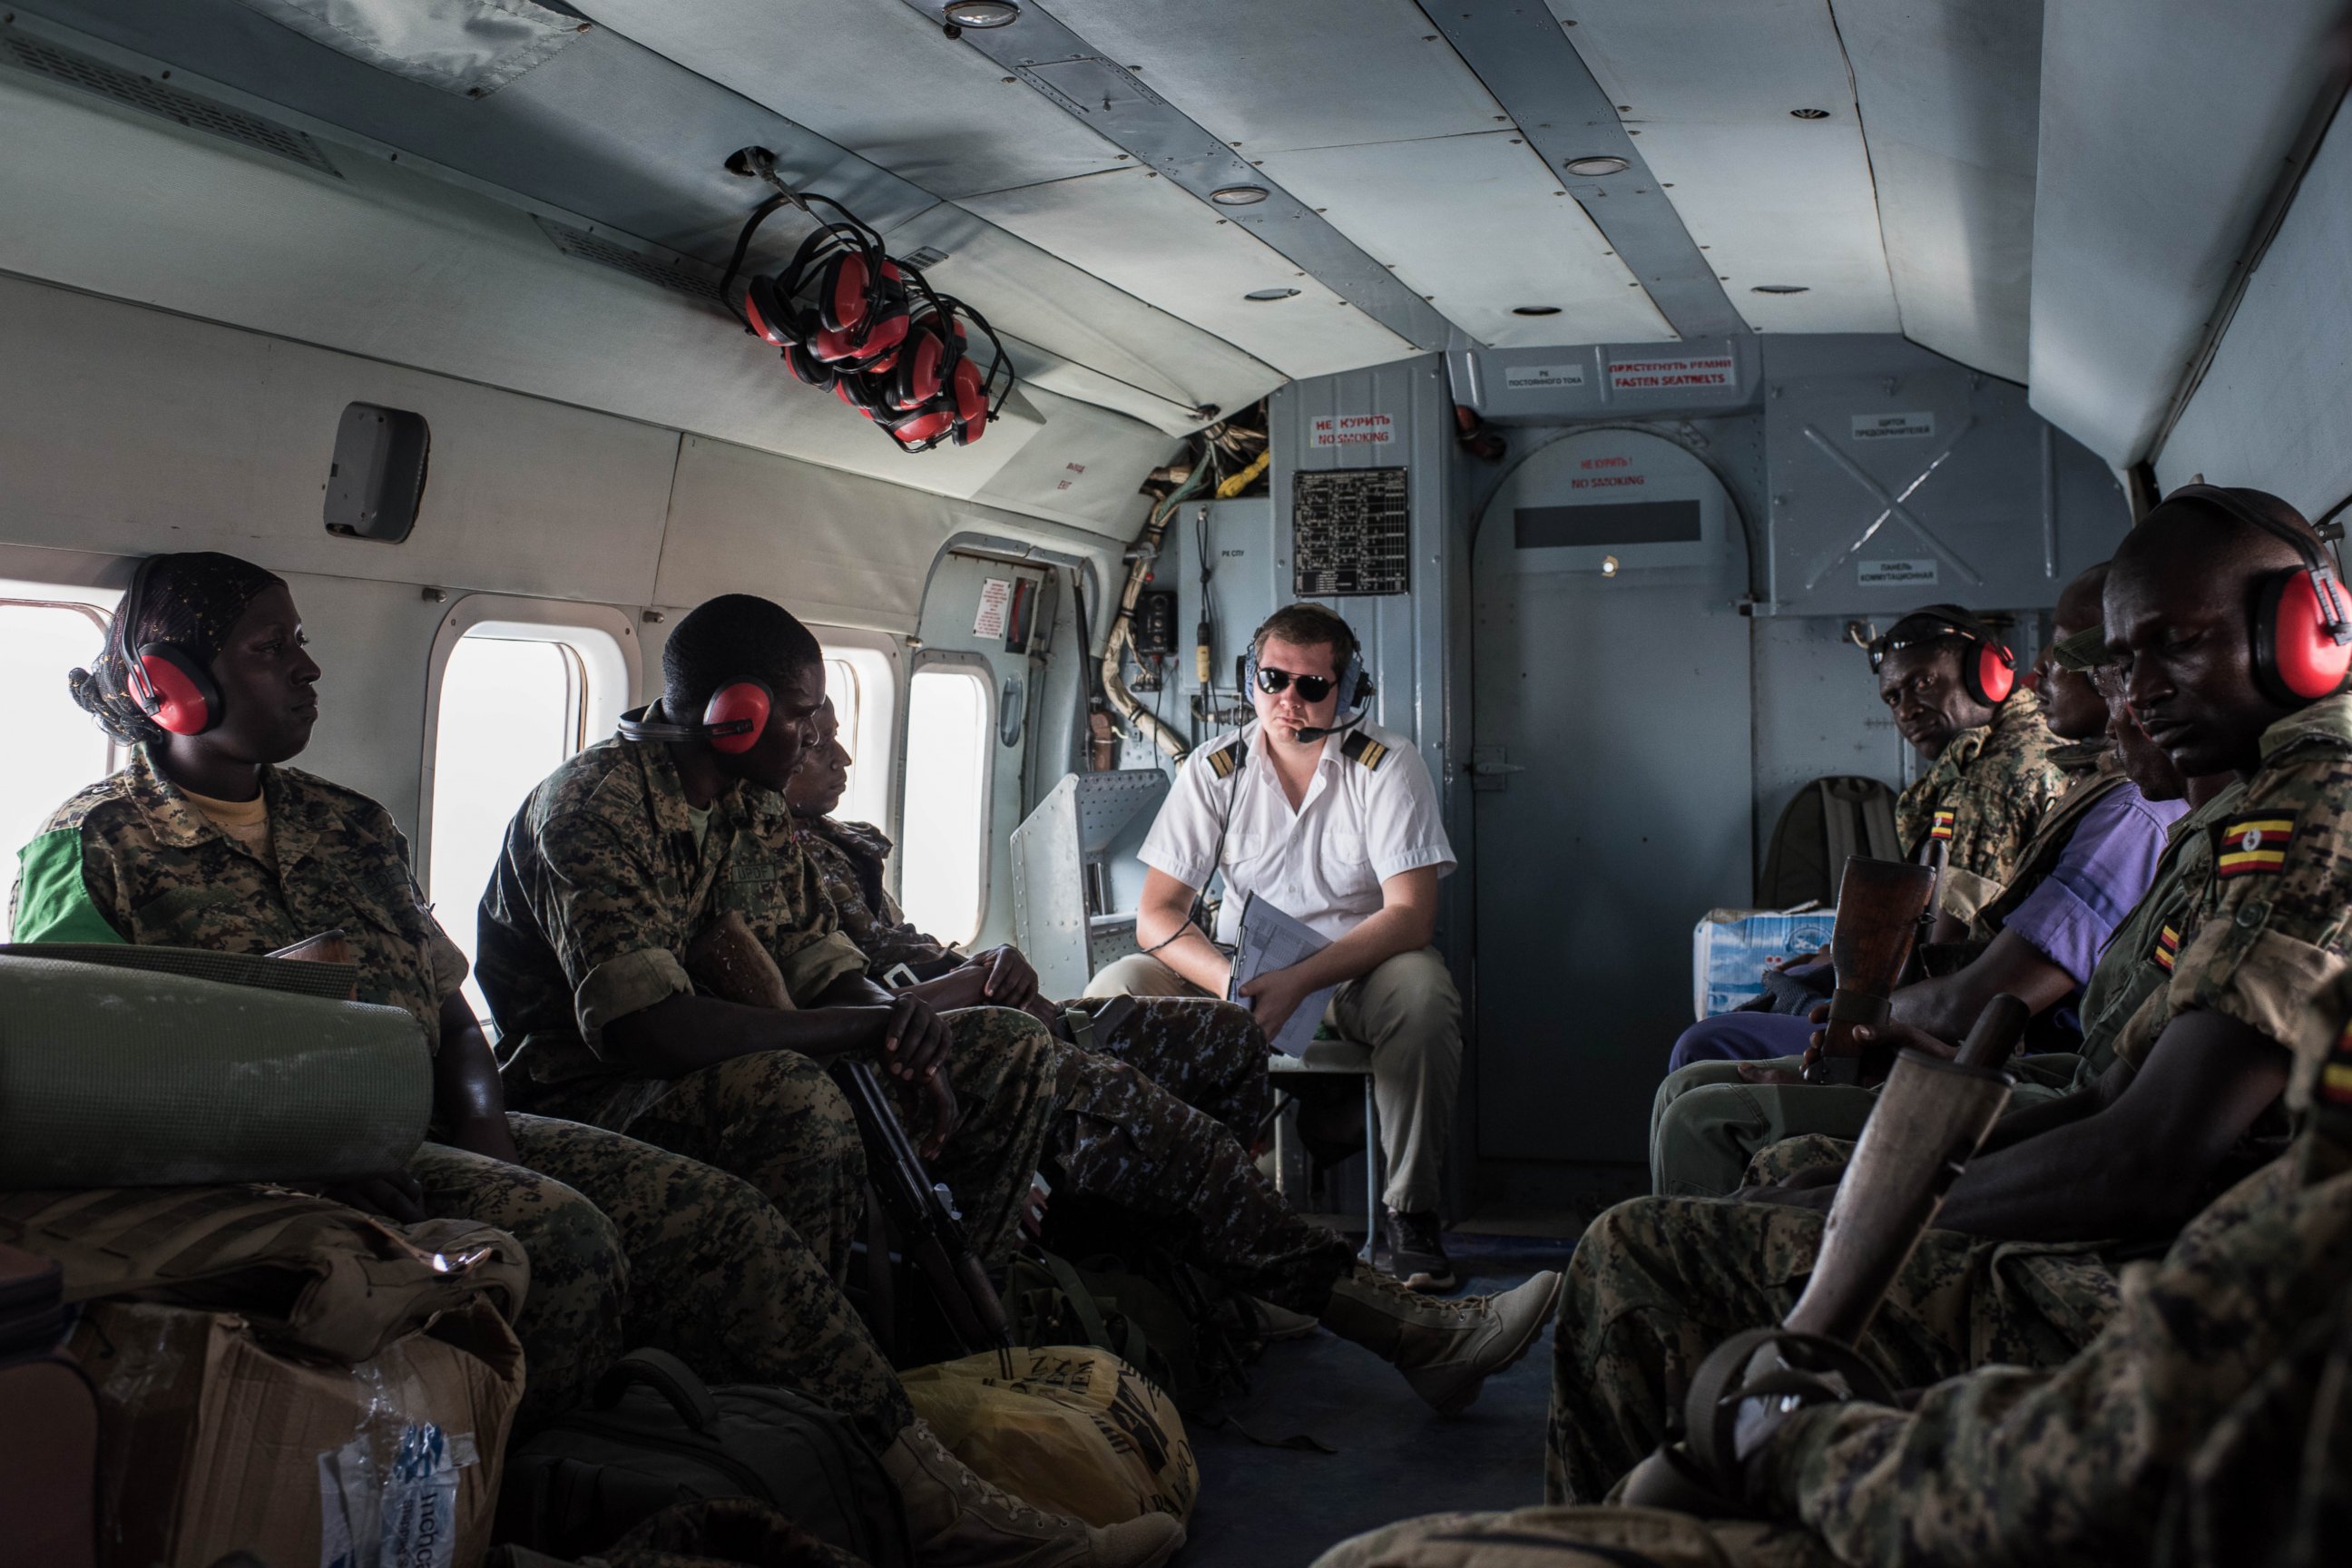 PHOTO: Members of the Uganda People's Defense Force (UPDF) serving in the African Union Mission in Somalia (AMISOM) travel in an United Nations helicopter on Oct. 10, 2016, departing from Mogadishu, Somalia. 